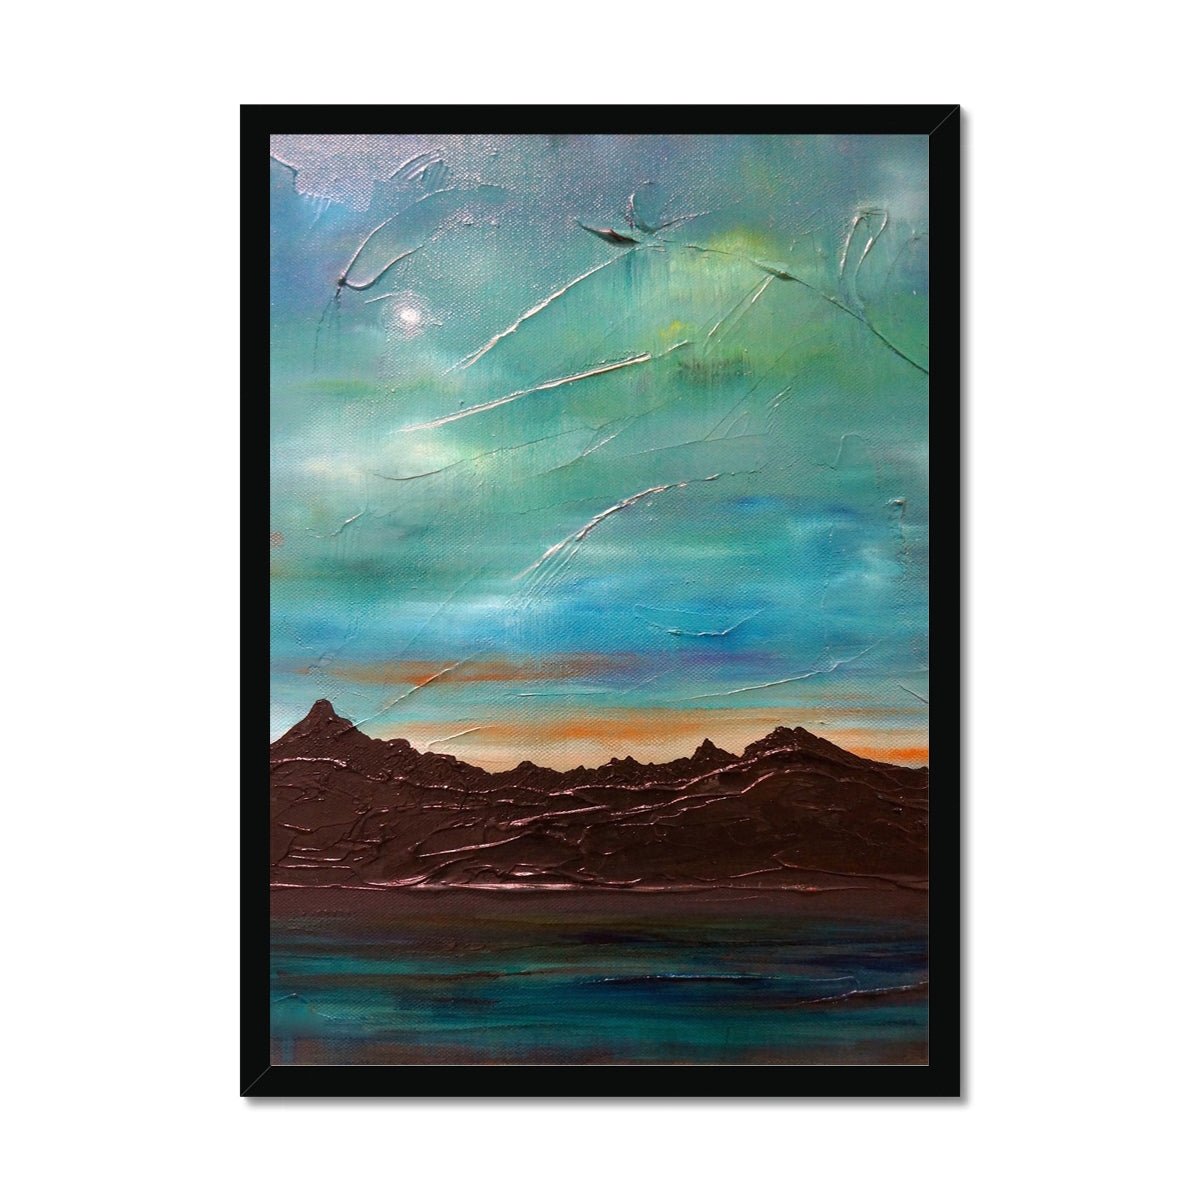 The Cuillin From Elgol Skye Painting | Framed Prints From Scotland-Framed Prints-Skye Art Gallery-A2 Portrait-Black Frame-Paintings, Prints, Homeware, Art Gifts From Scotland By Scottish Artist Kevin Hunter